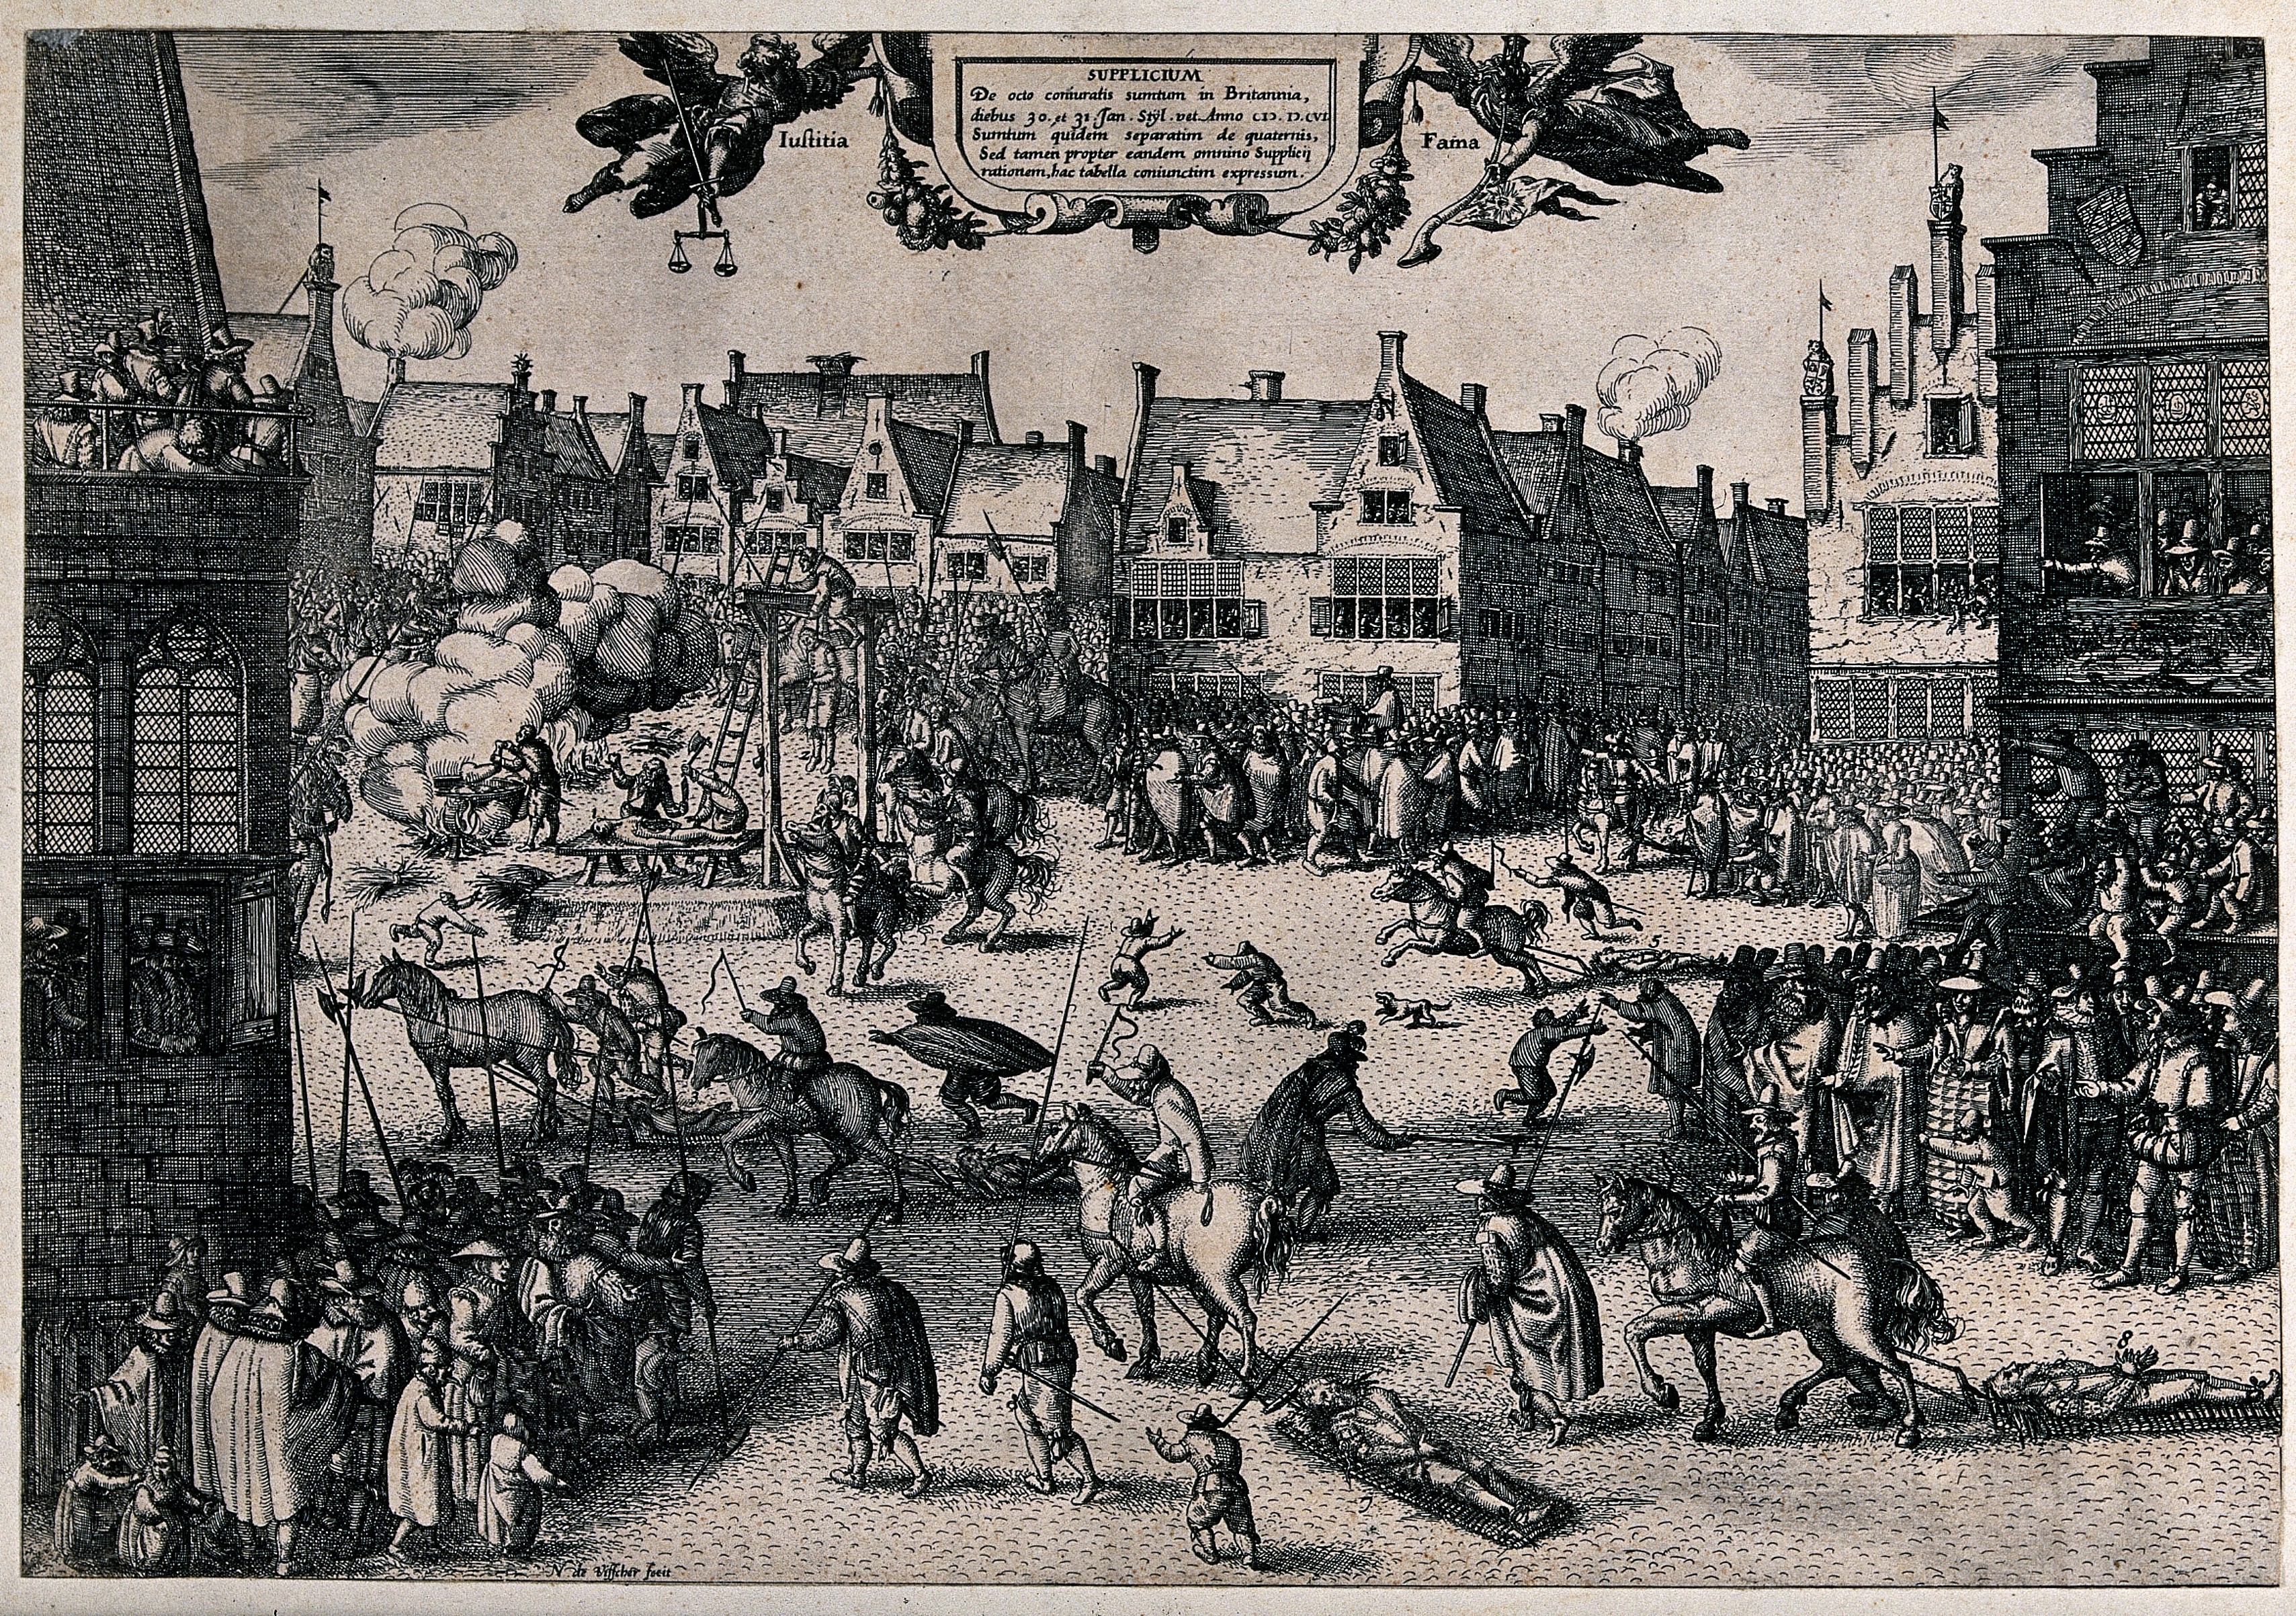 Forget gory Gunpowder – Jacobean England had a bloodcurdling appetite for  violence